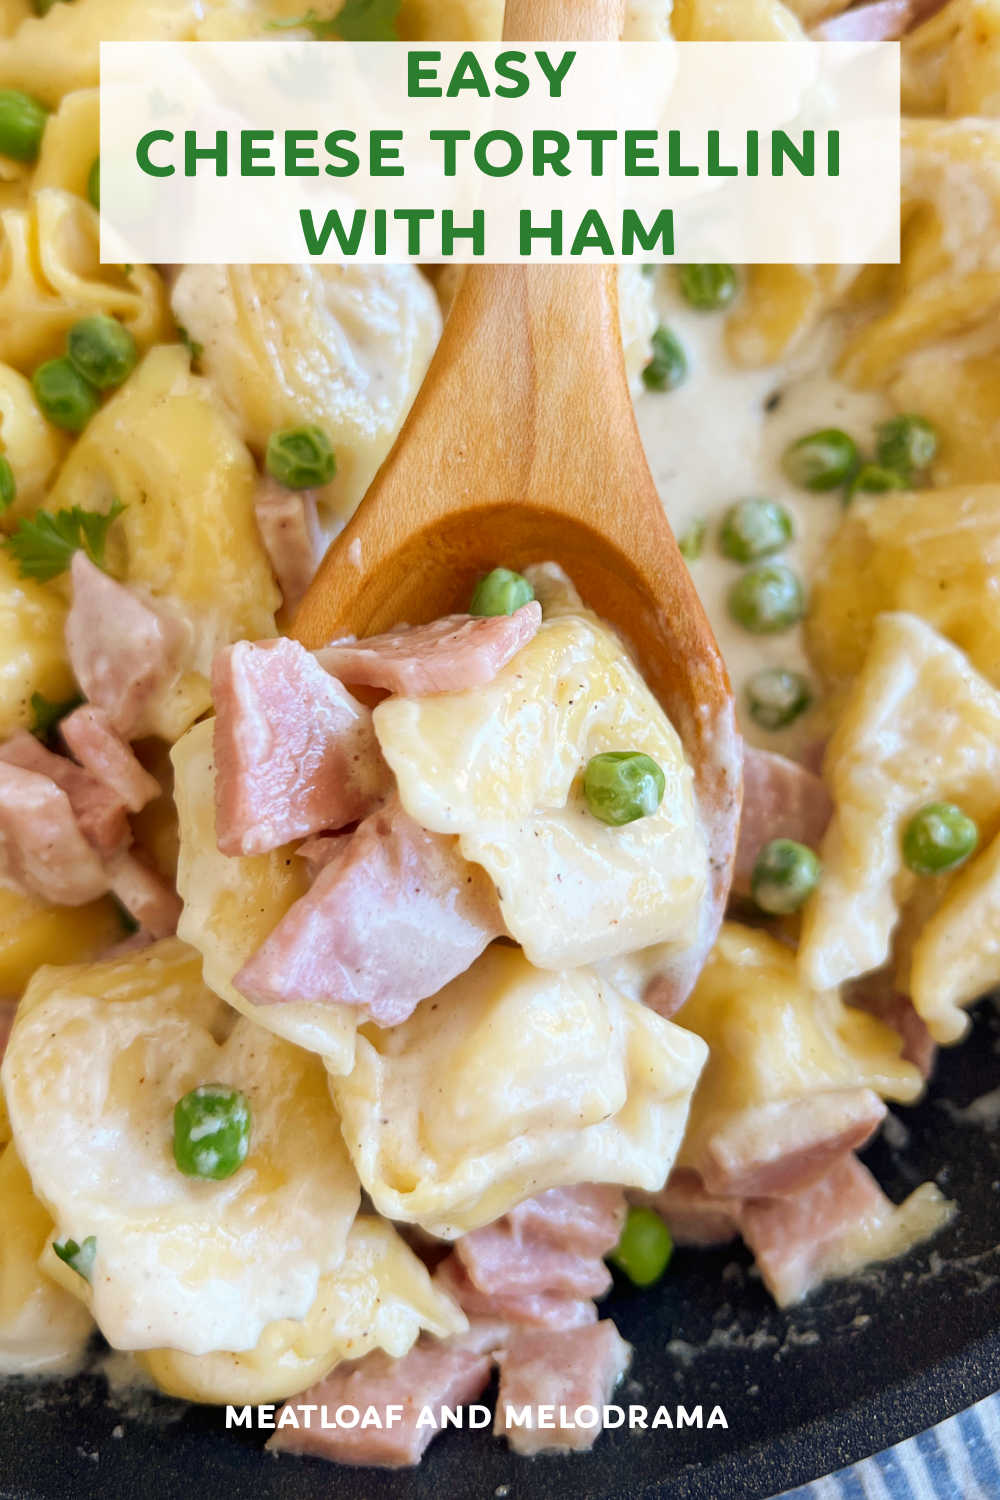 Cheese Tortellini with Ham and Peas is an easy recipe with leftover ham and tender tortellini in a delicious Parmesan cheese sauce. An easy weeknight meal the whole family will love that takes minutes to make! via @meamel